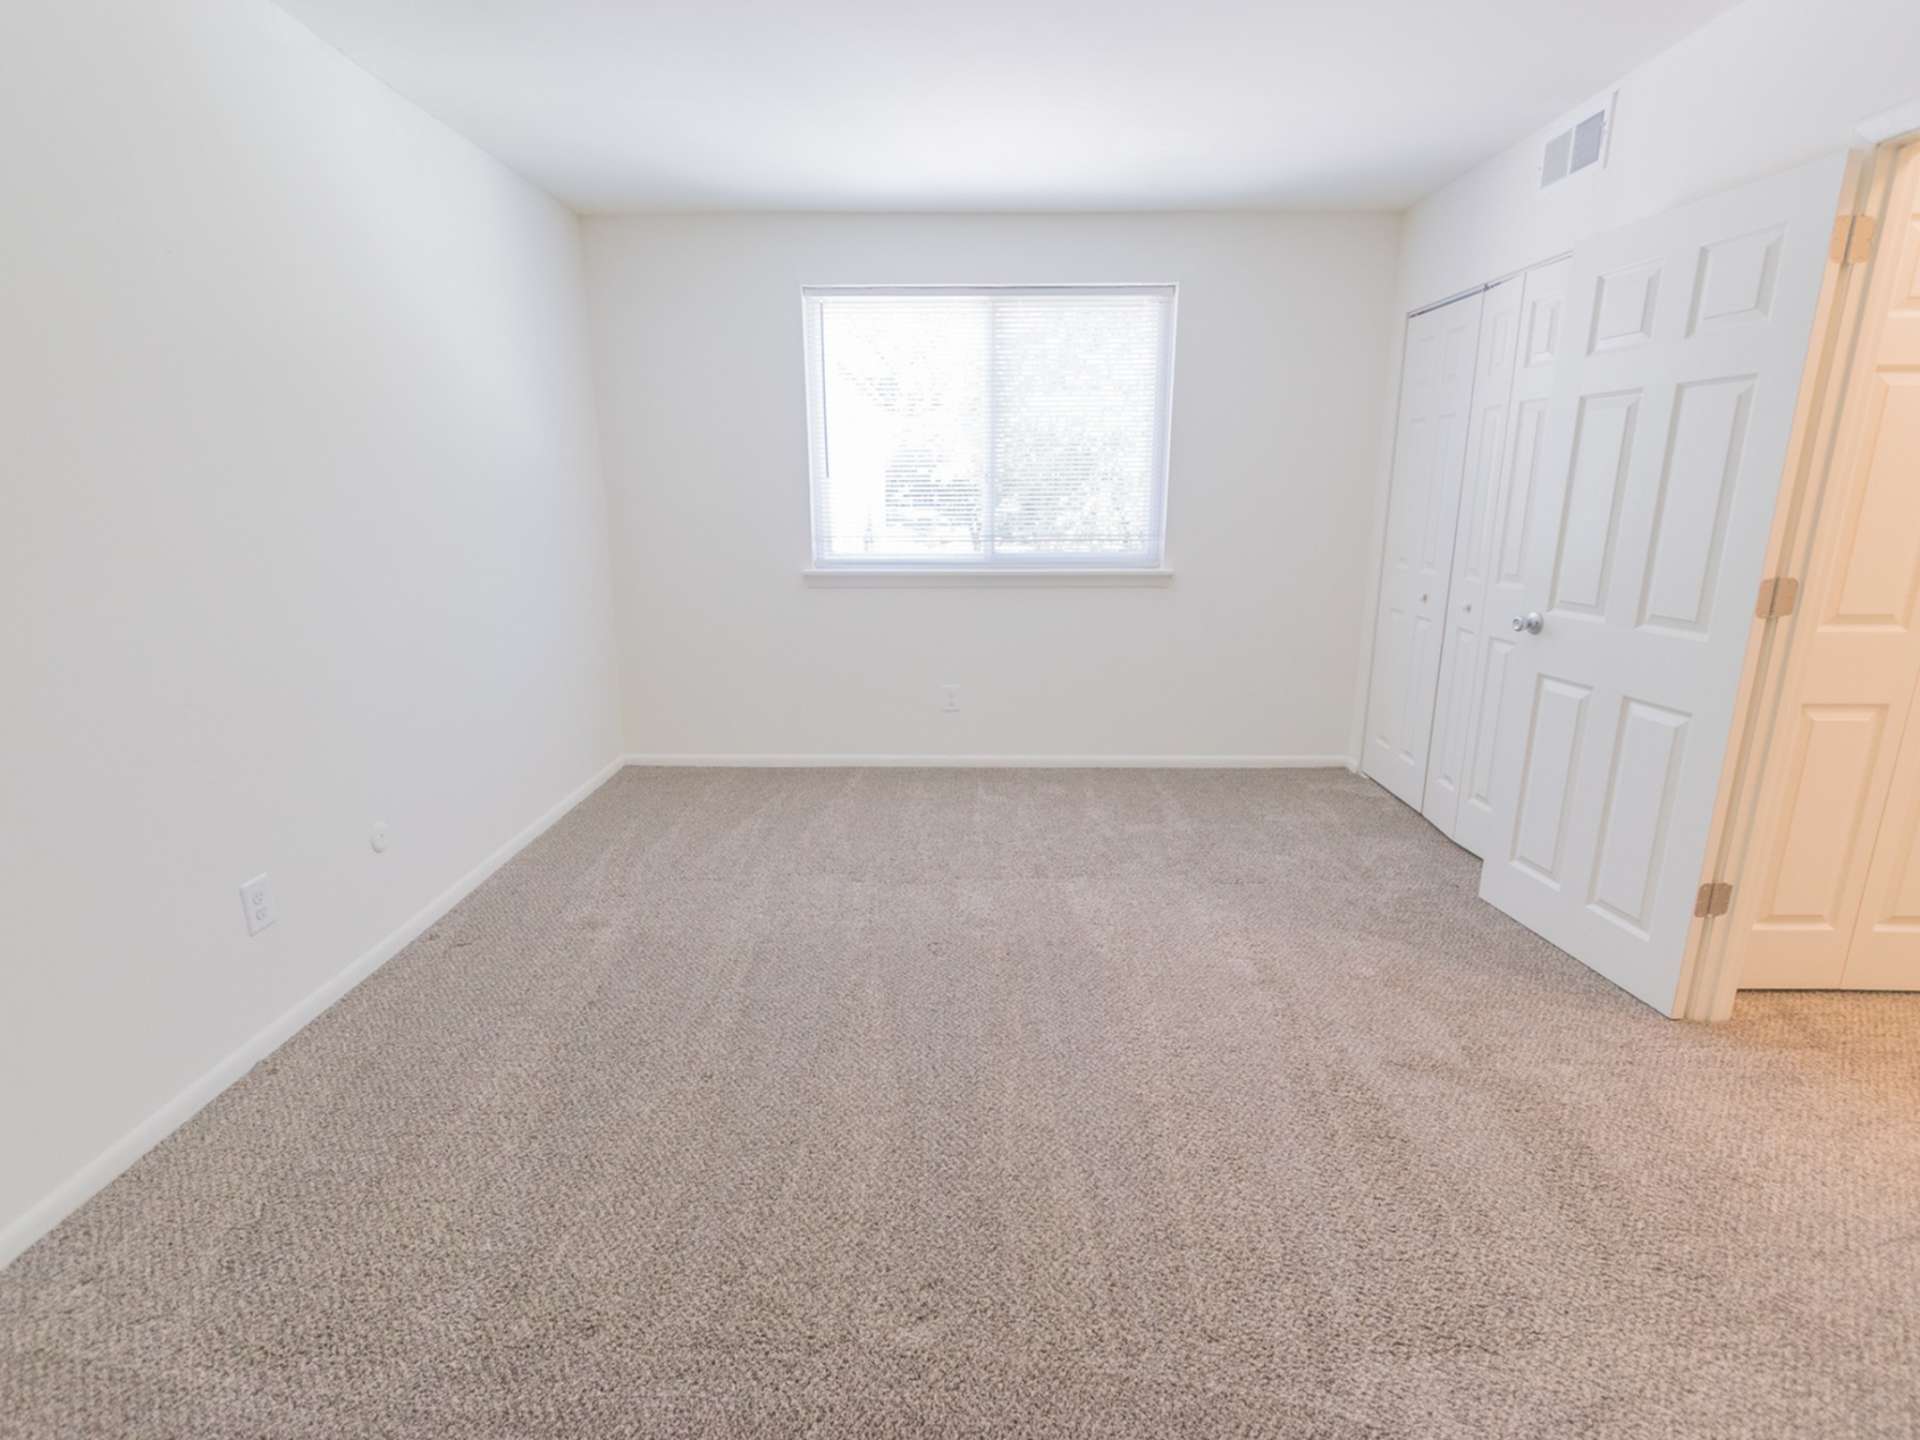 Carpeted bedroom with a large window, white walls, and closet.